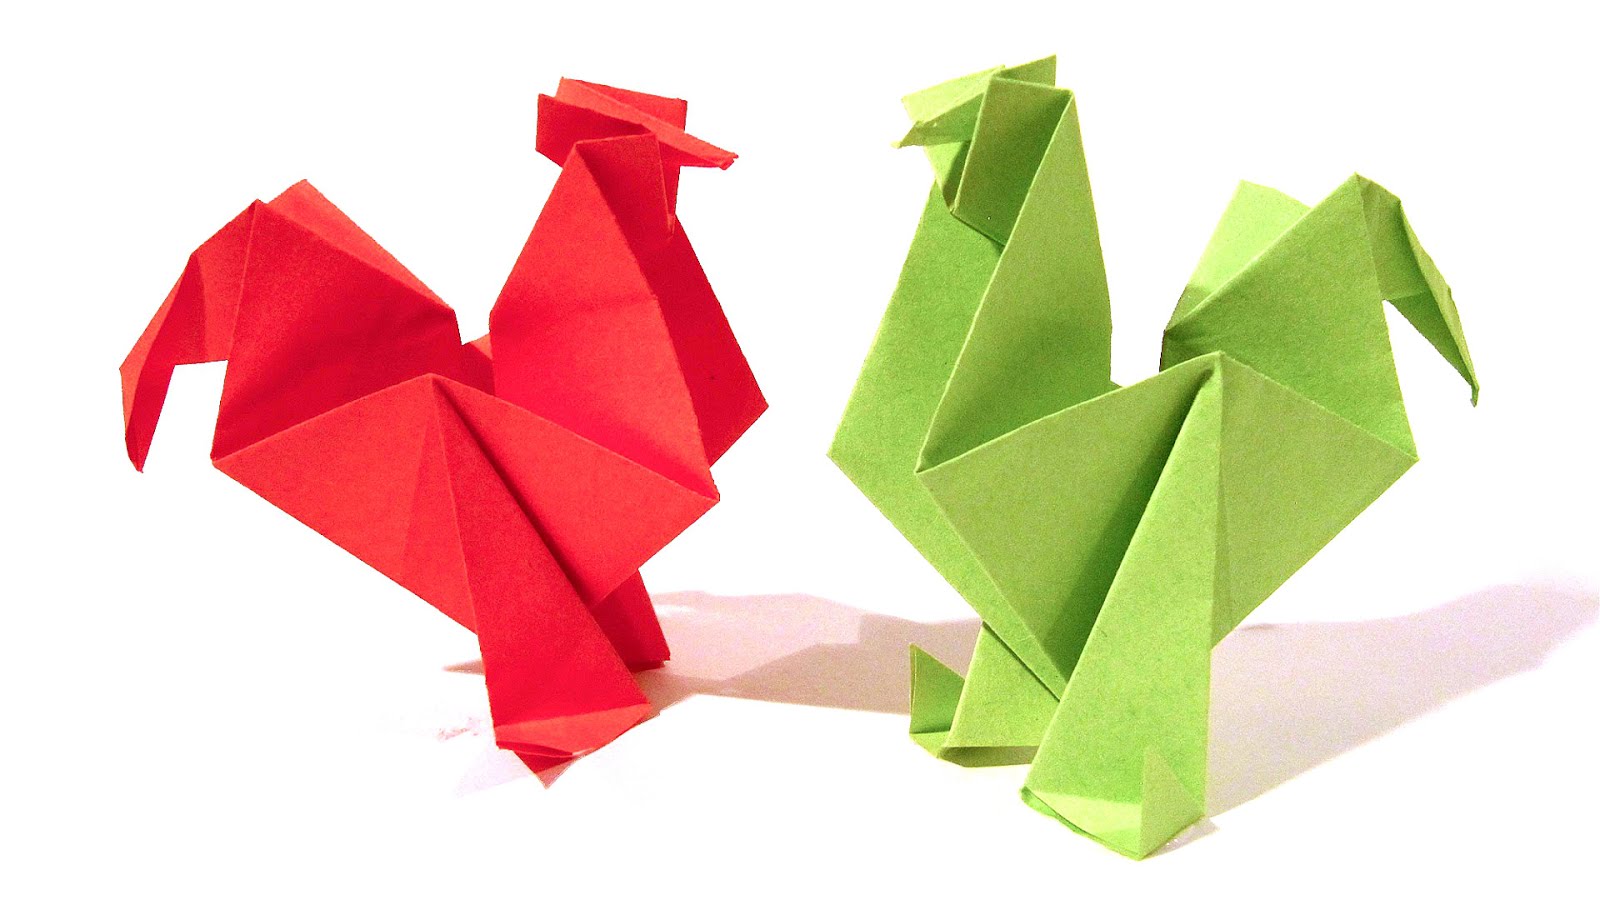 How To Make Origami Balloon - Origami Choices